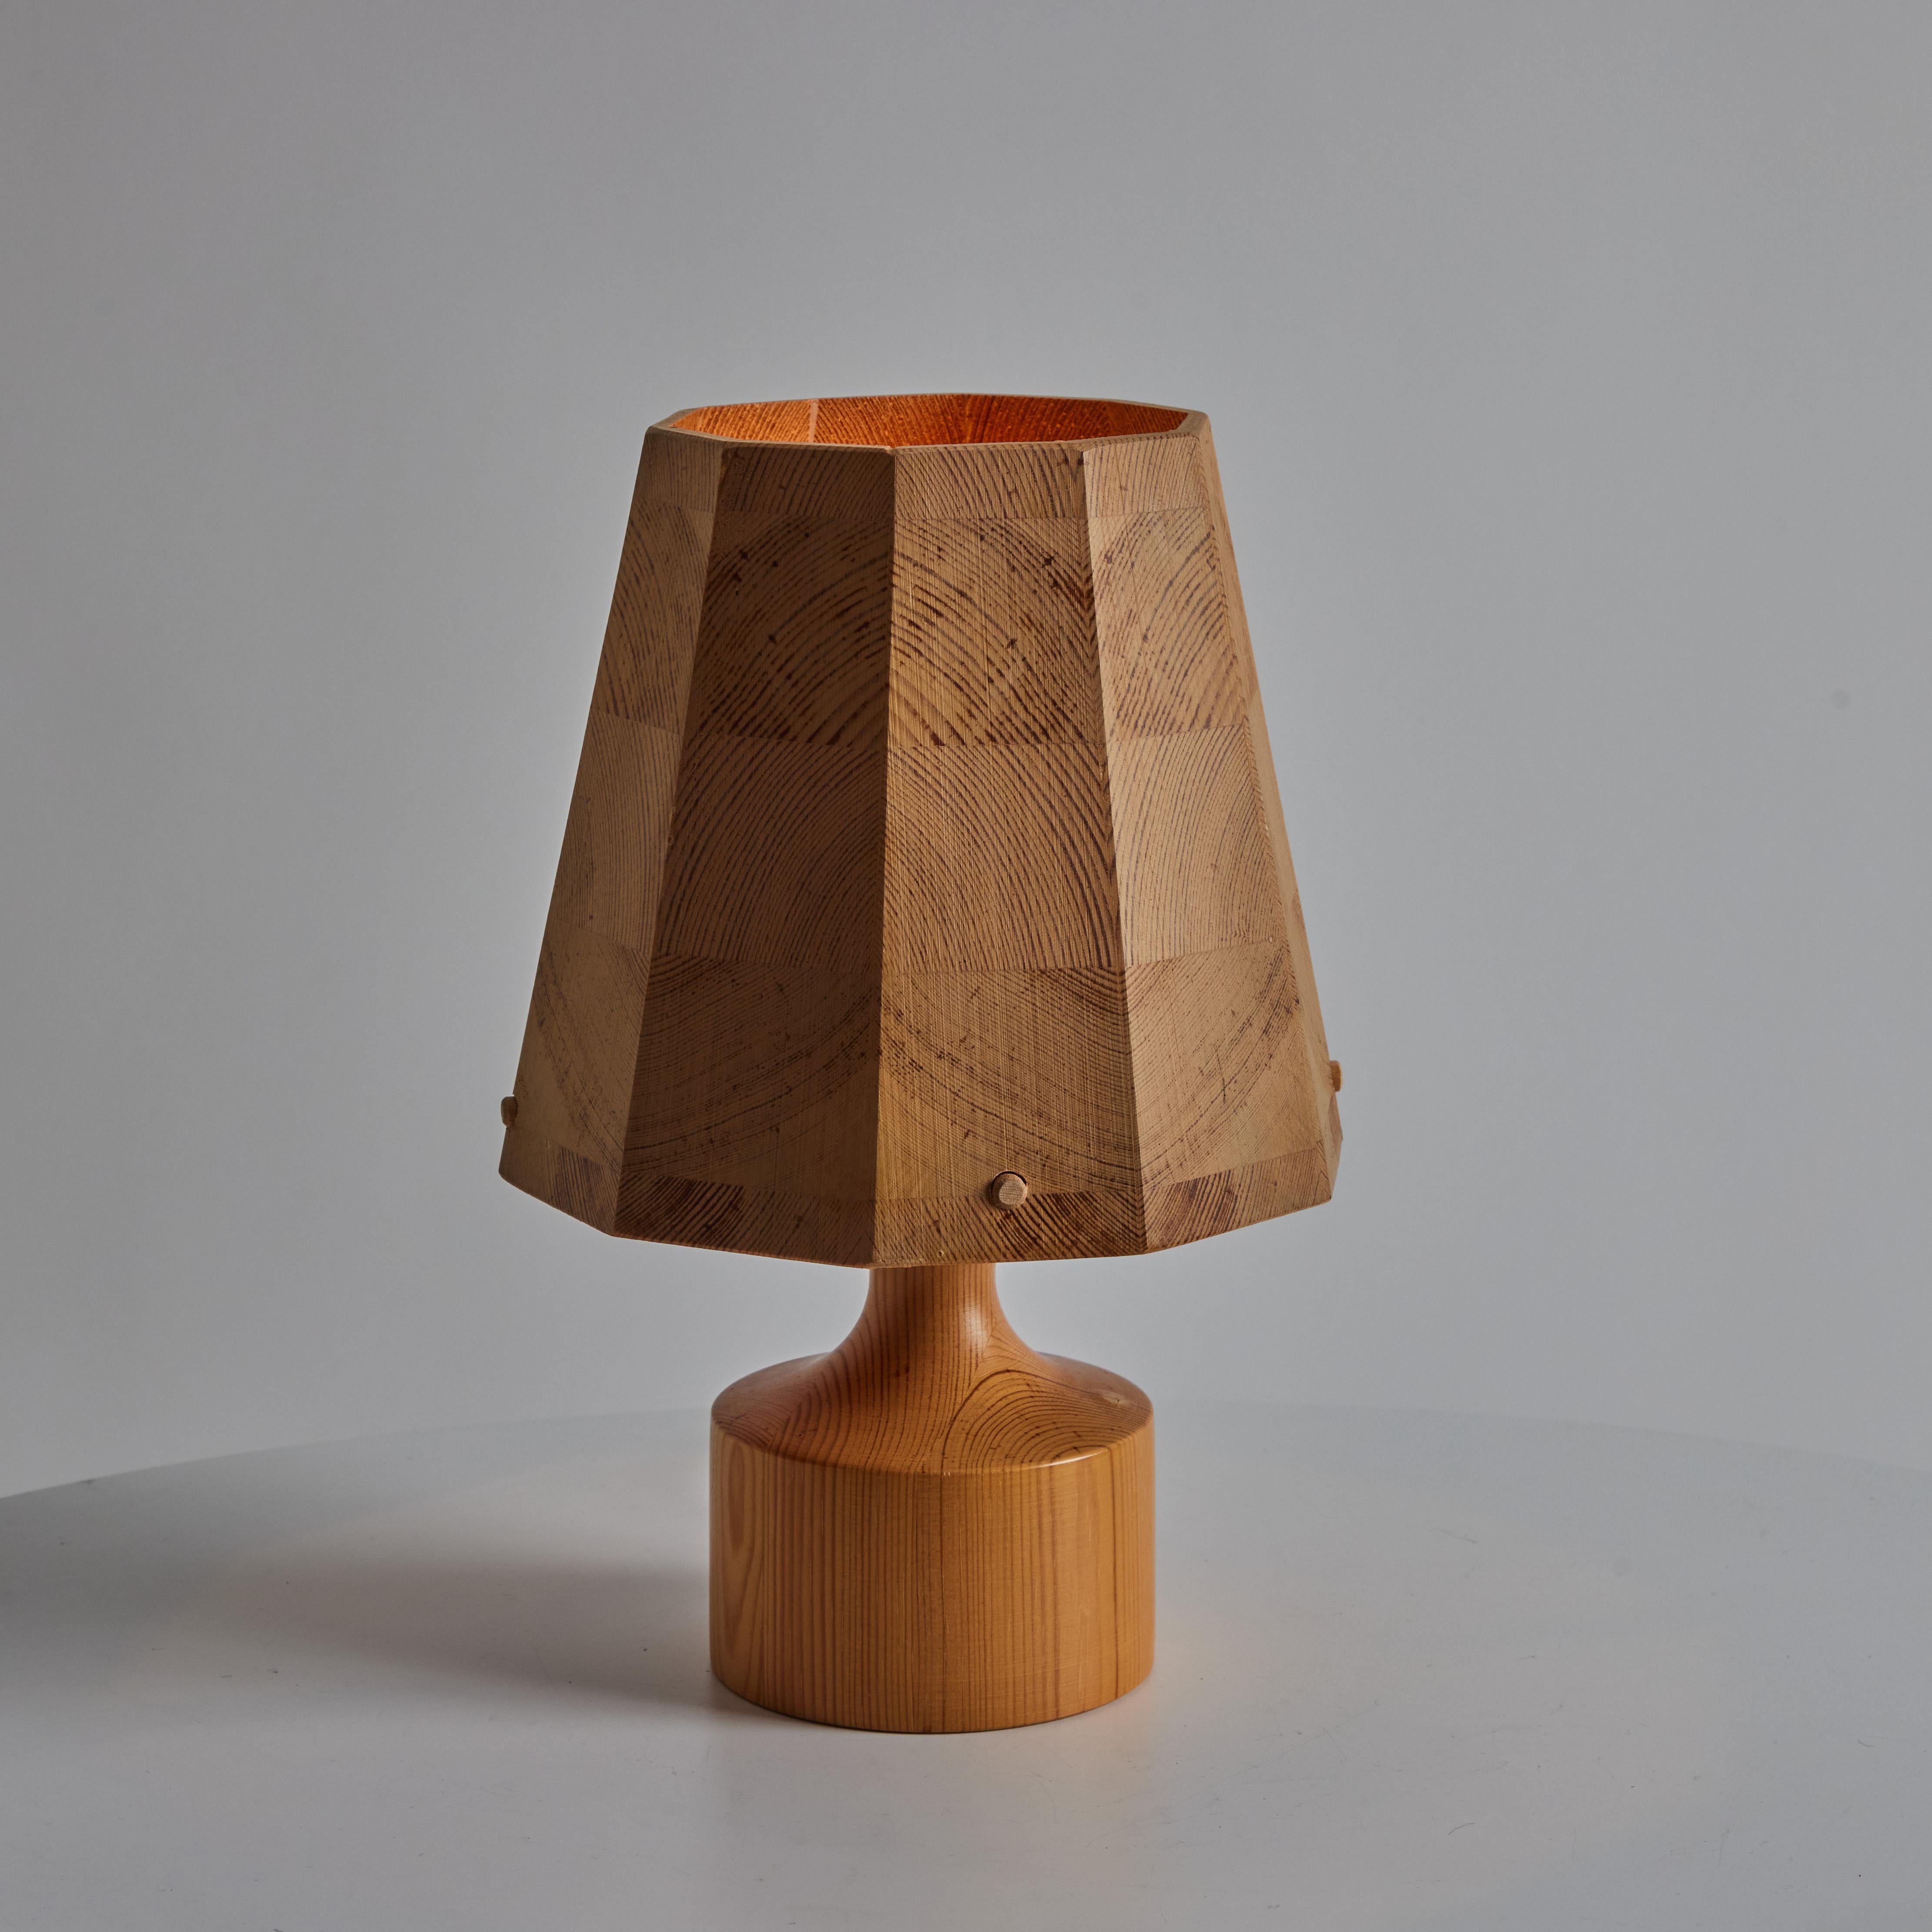 Pair of 1960s Wood Table Lamps Attributed to Hans-Agne Jakobsson for AB Ellysett For Sale 1